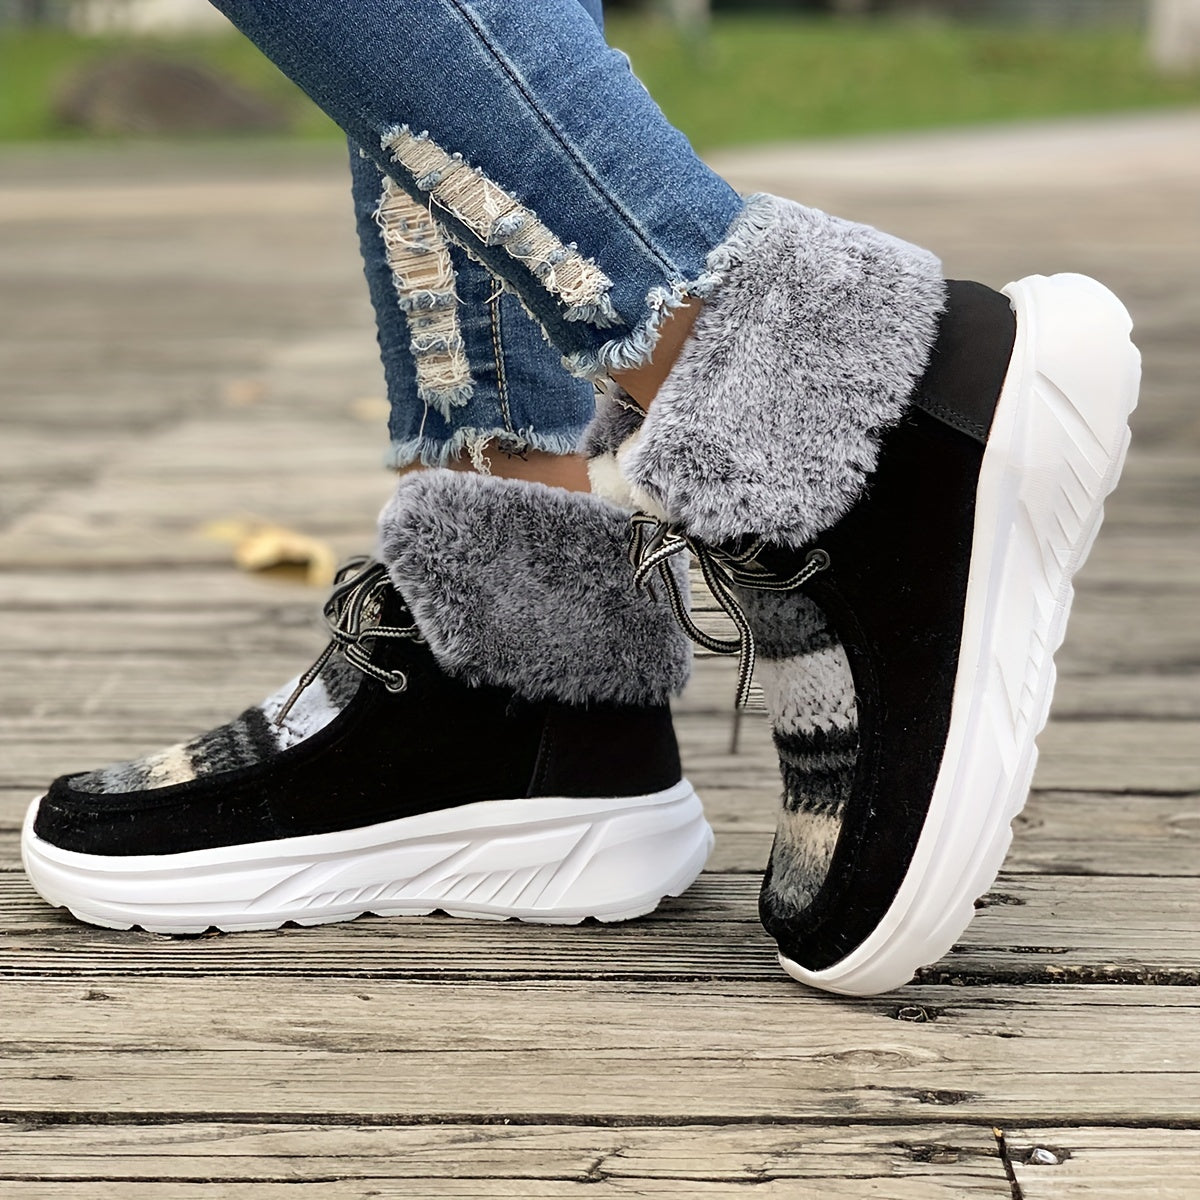 Fleece Lining Snow Boots, Round Toe High Top Ankle Boots